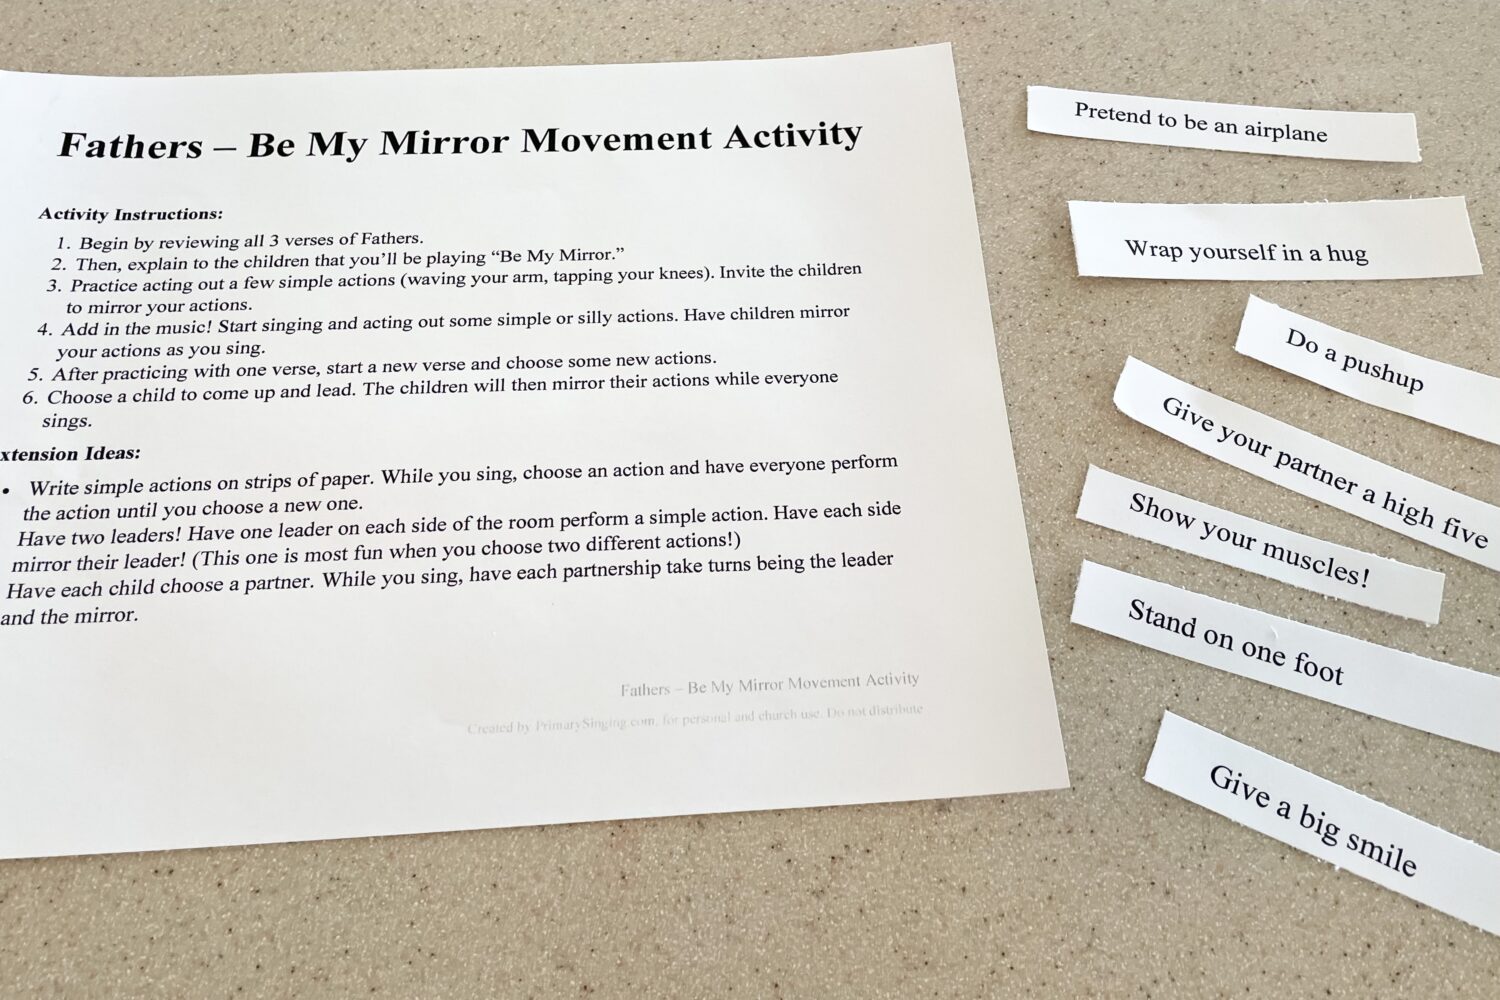 Fathers Be My Mirror Movement Activity Easy ideas for Music Leaders IMG 6646 e1654983696553